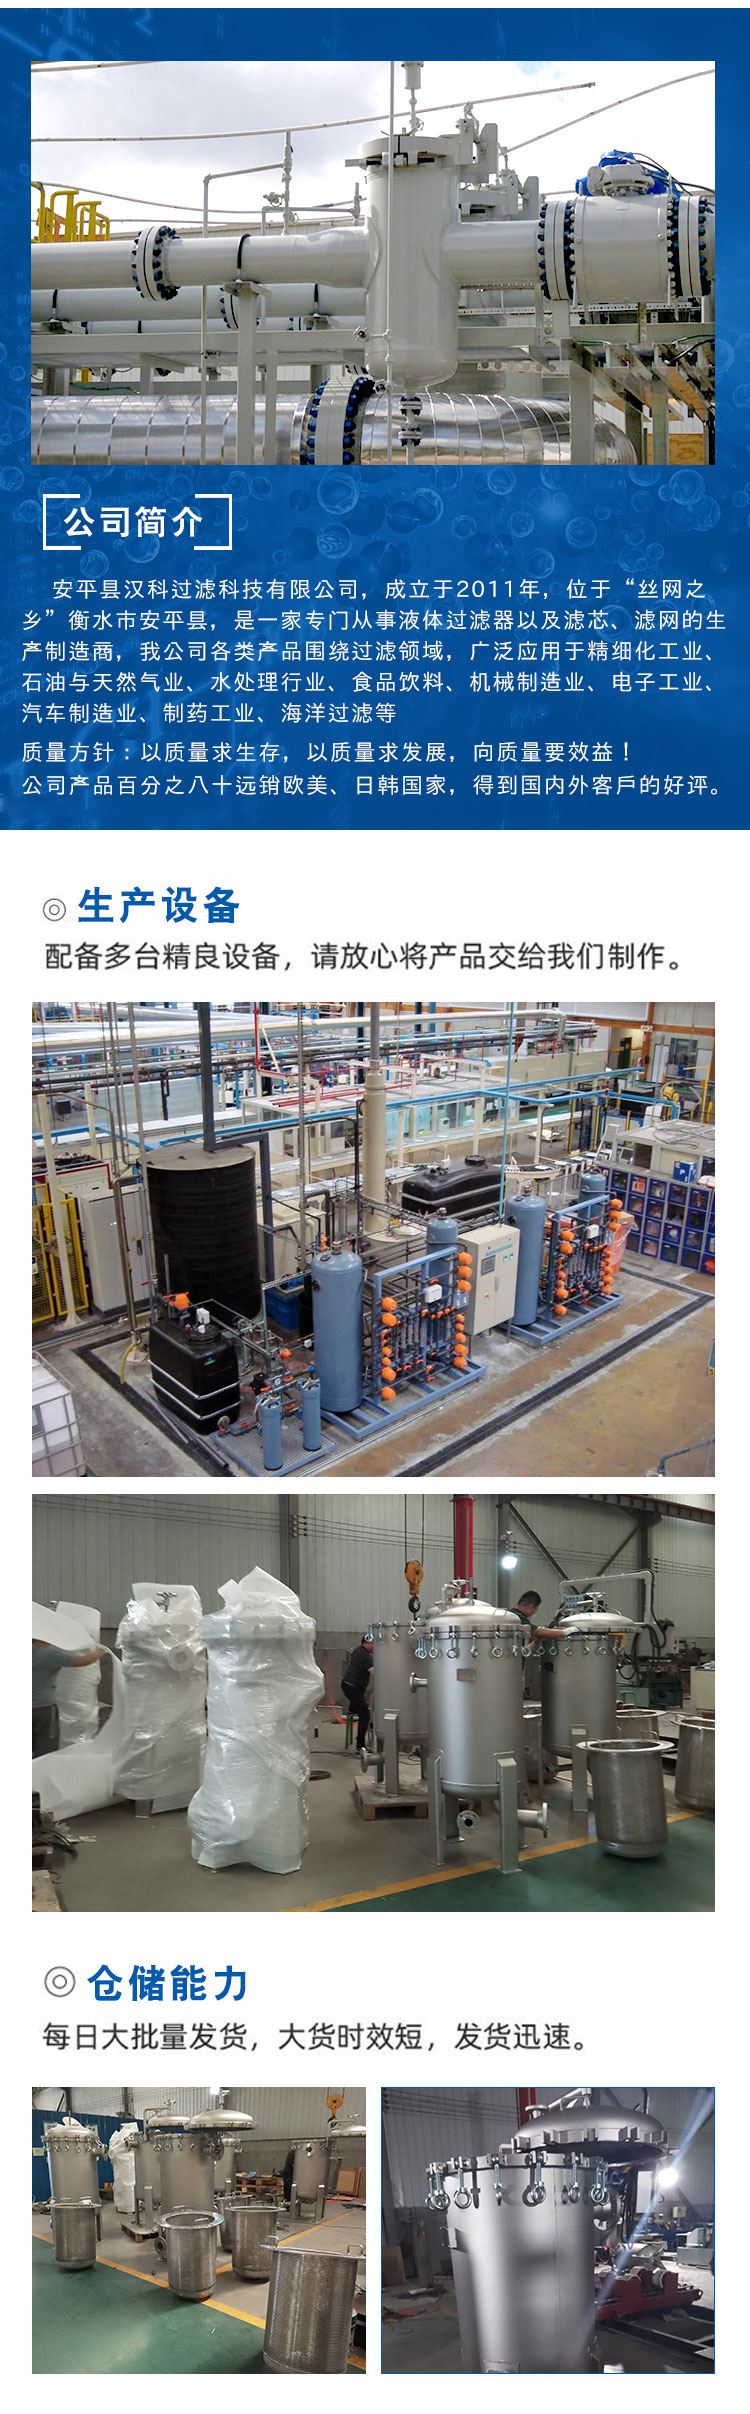 Hanke produces 1.5MPa stainless steel filter equipment for bag filters, non-woven filter material